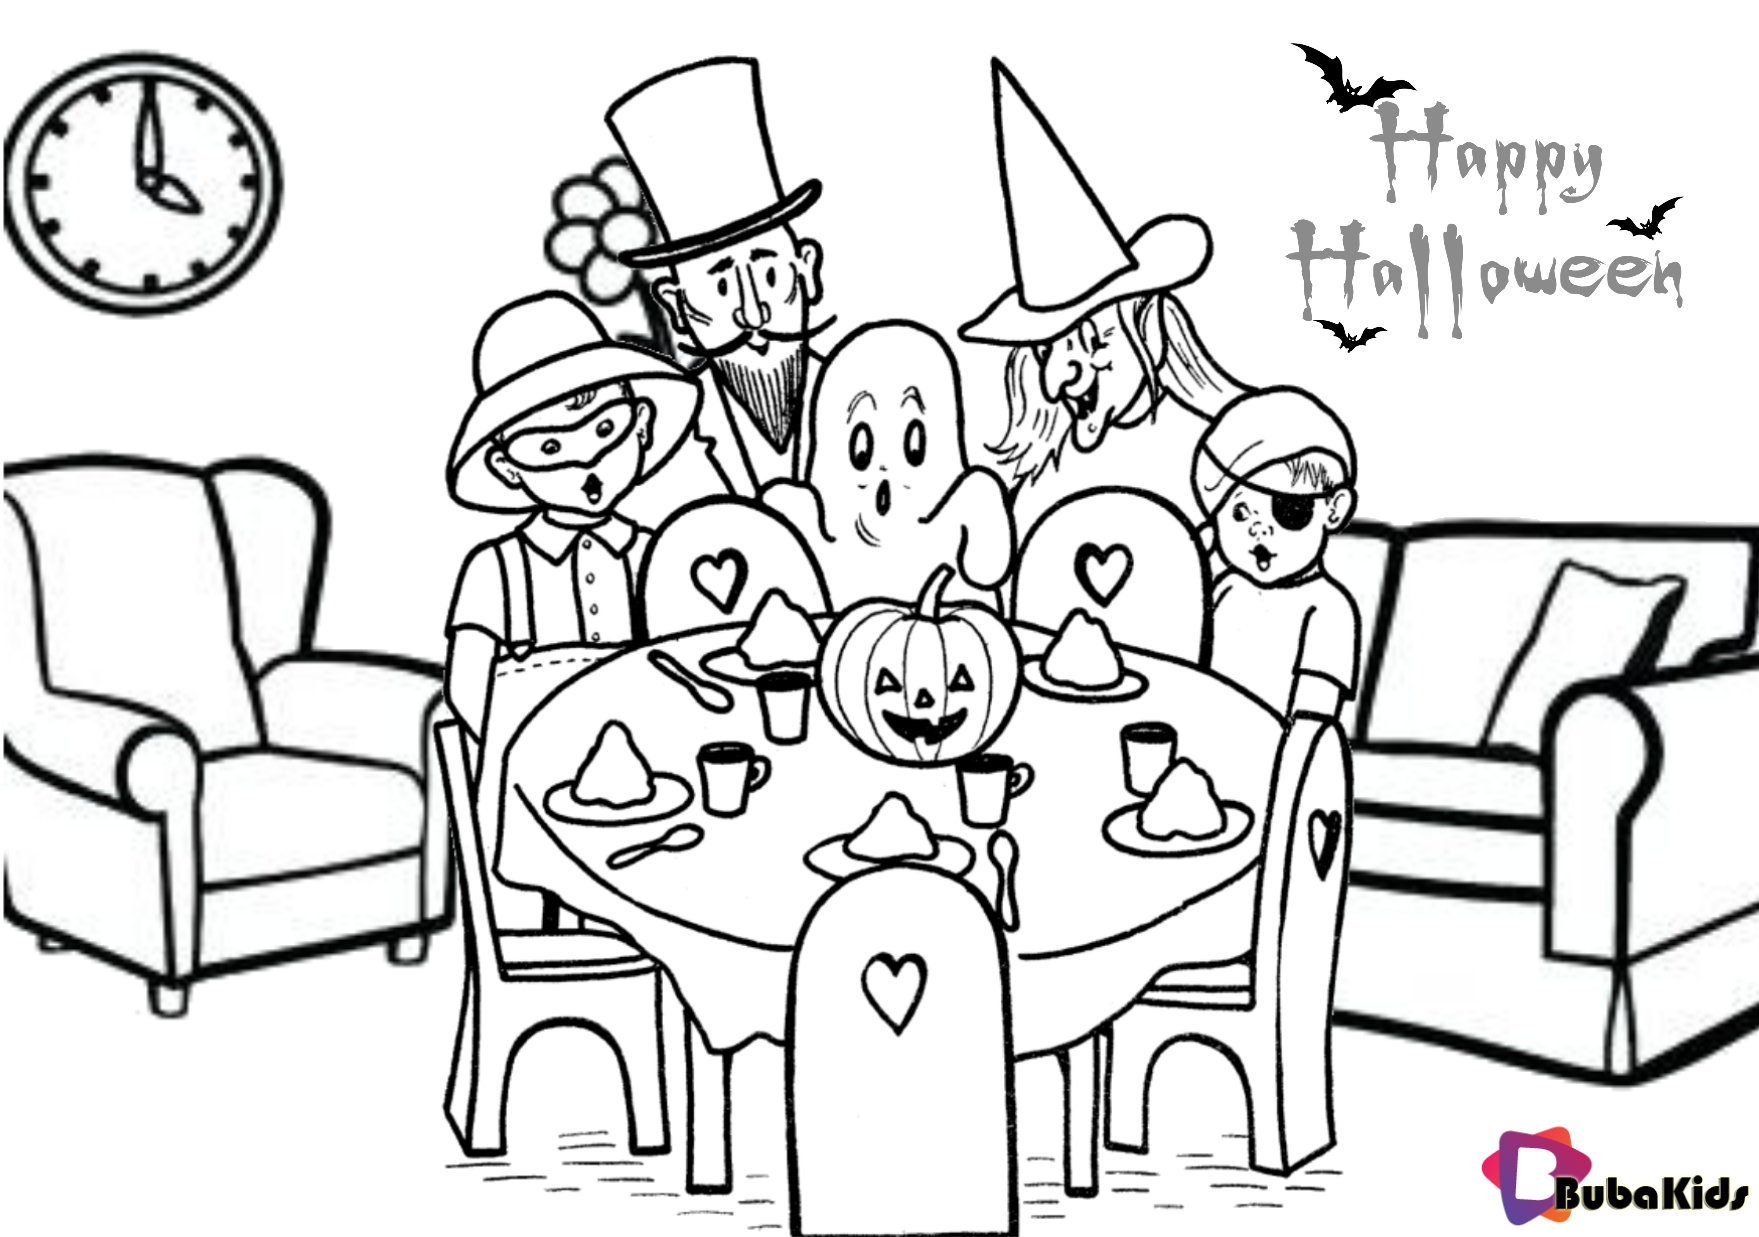 Halloween party free printable coloring pages.